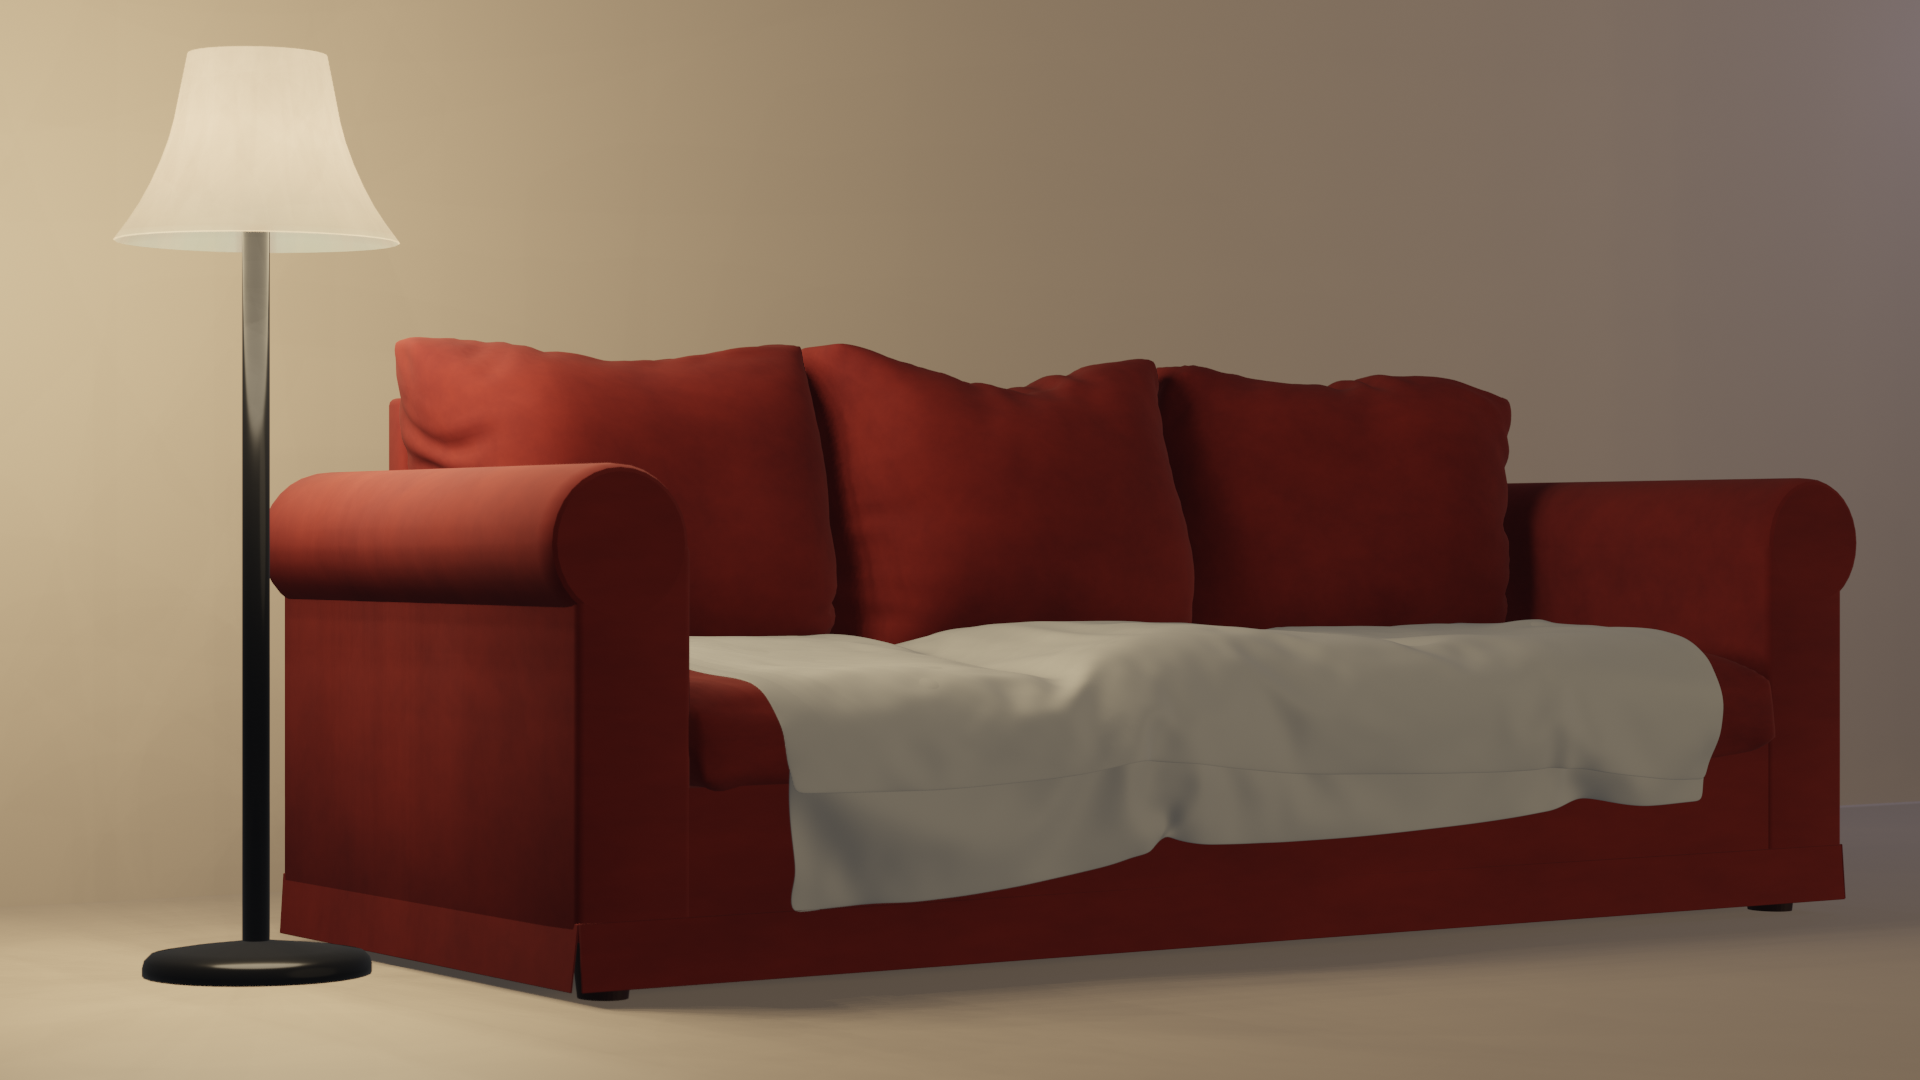 Red couch, with white blanket draped across seat, with standing lamp